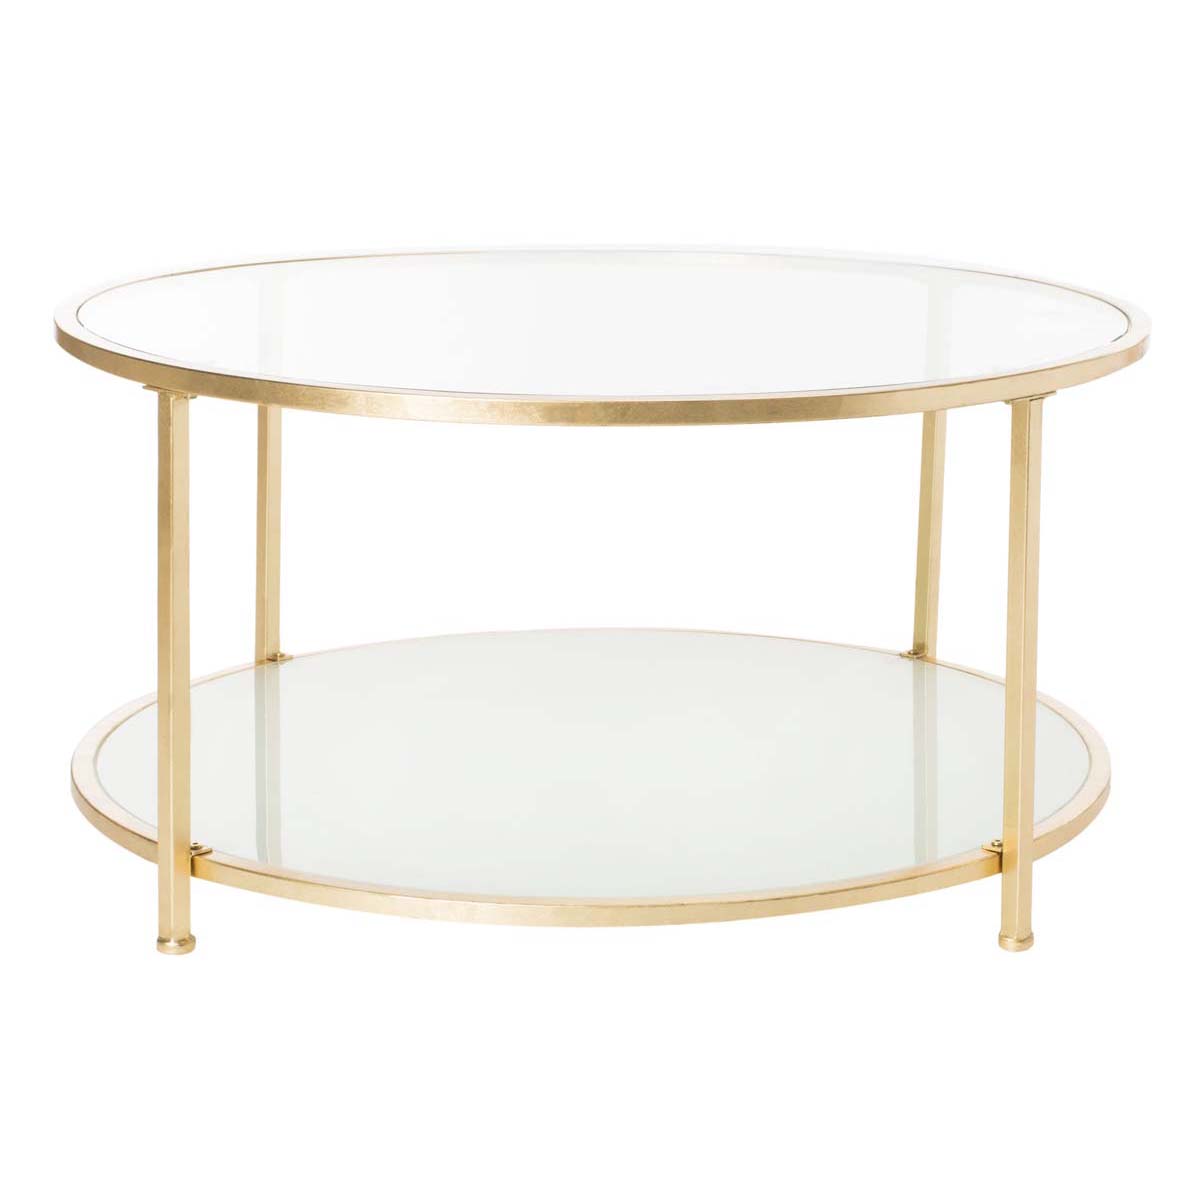 Safavieh Ivy 2 Tier Round Coffee Table , COF6203 - Glass/Gold Foil